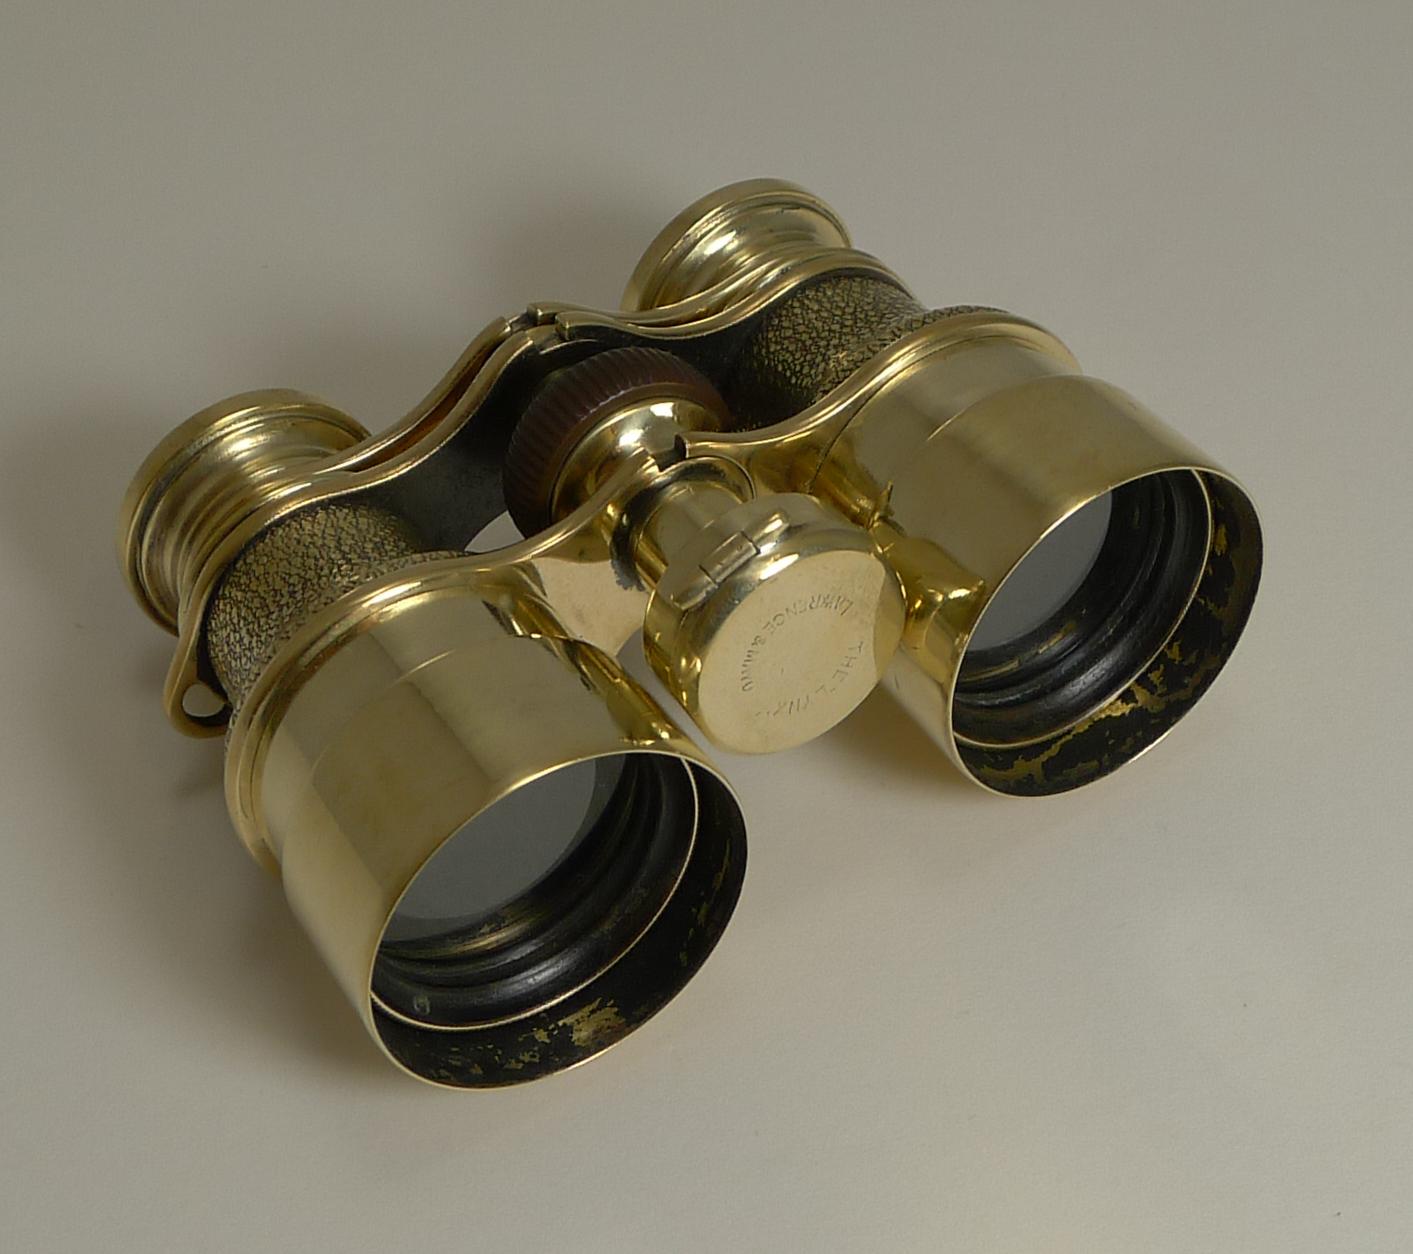 Antique English Field Glasses / Binoculars by Lawrence and Mayo - With Compass 2